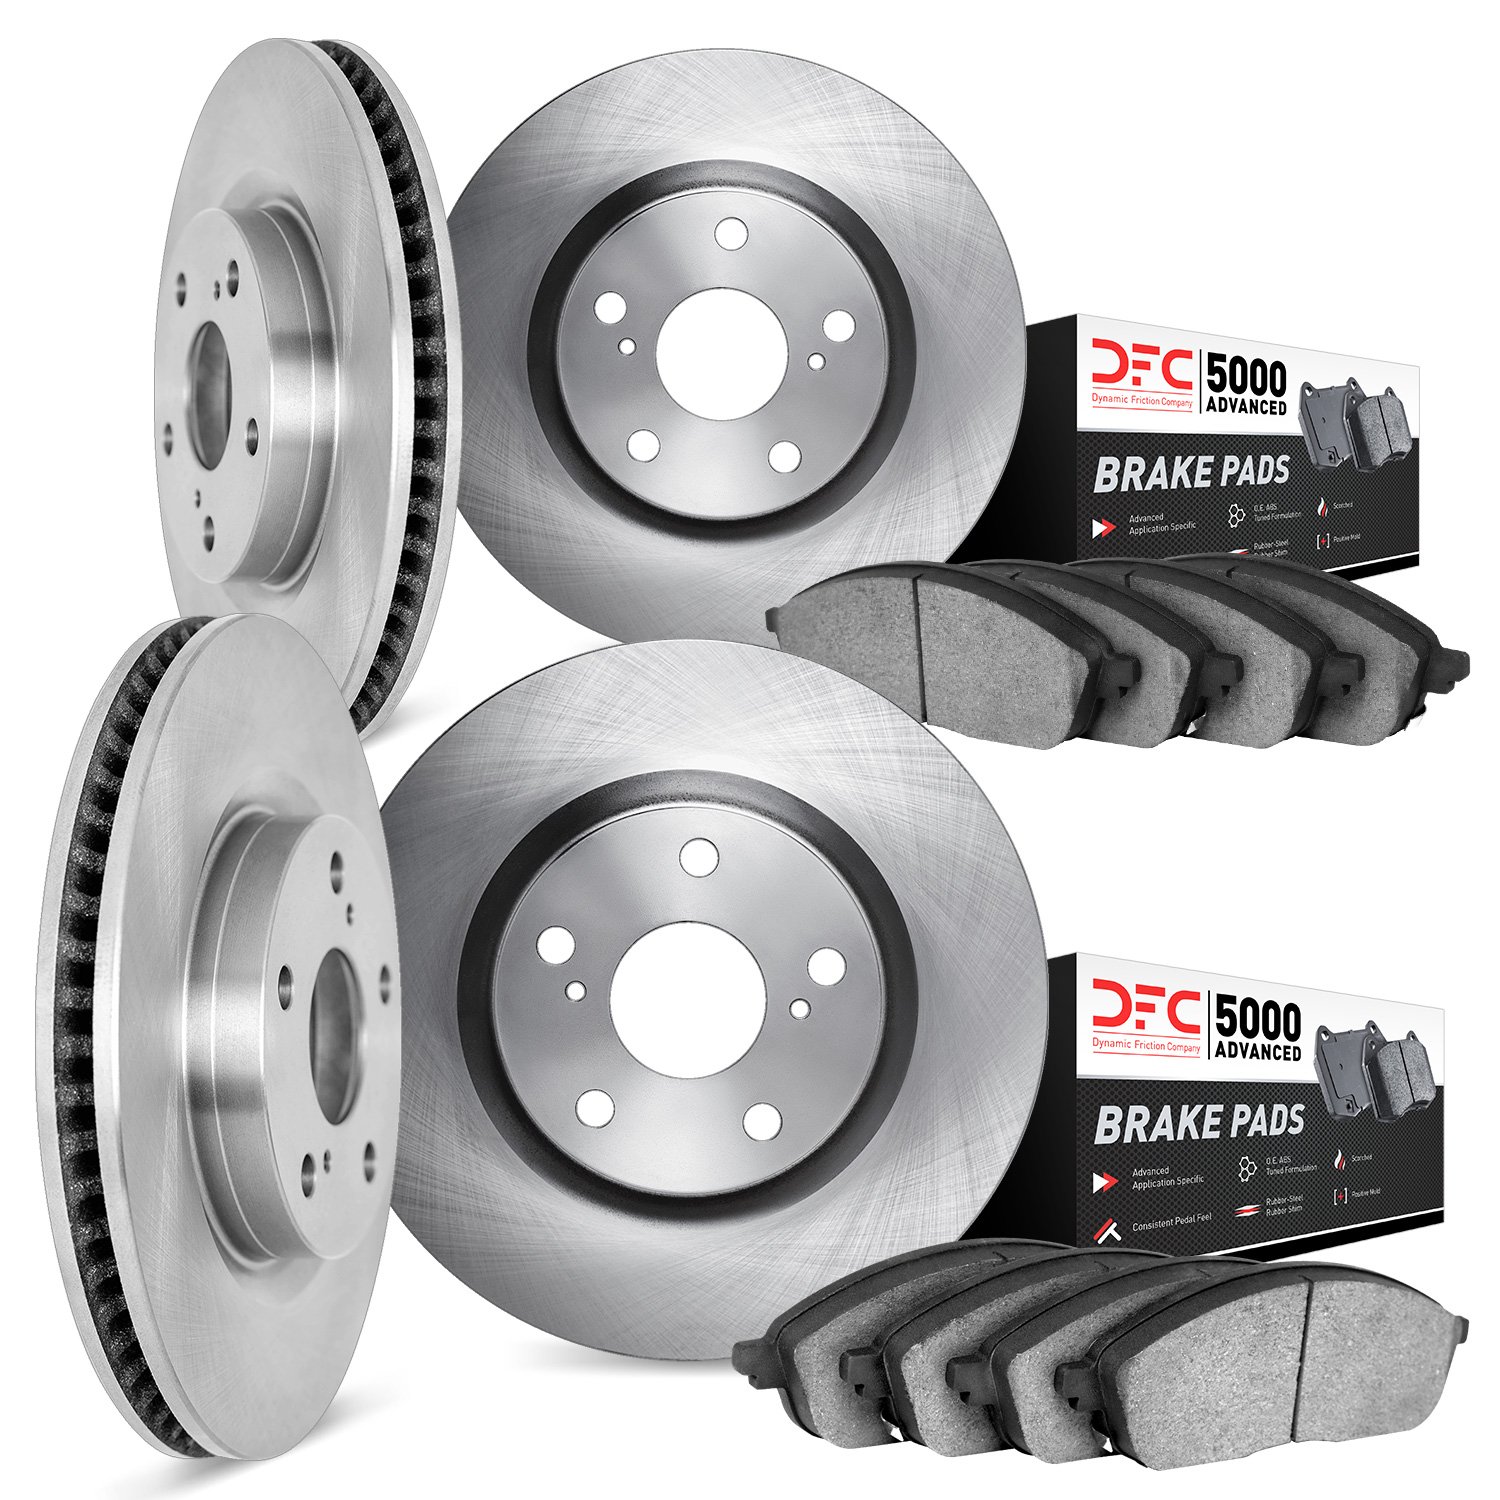 6504-31089 Brake Rotors w/5000 Advanced Brake Pads Kit, 2010-2015 BMW, Position: Front and Rear